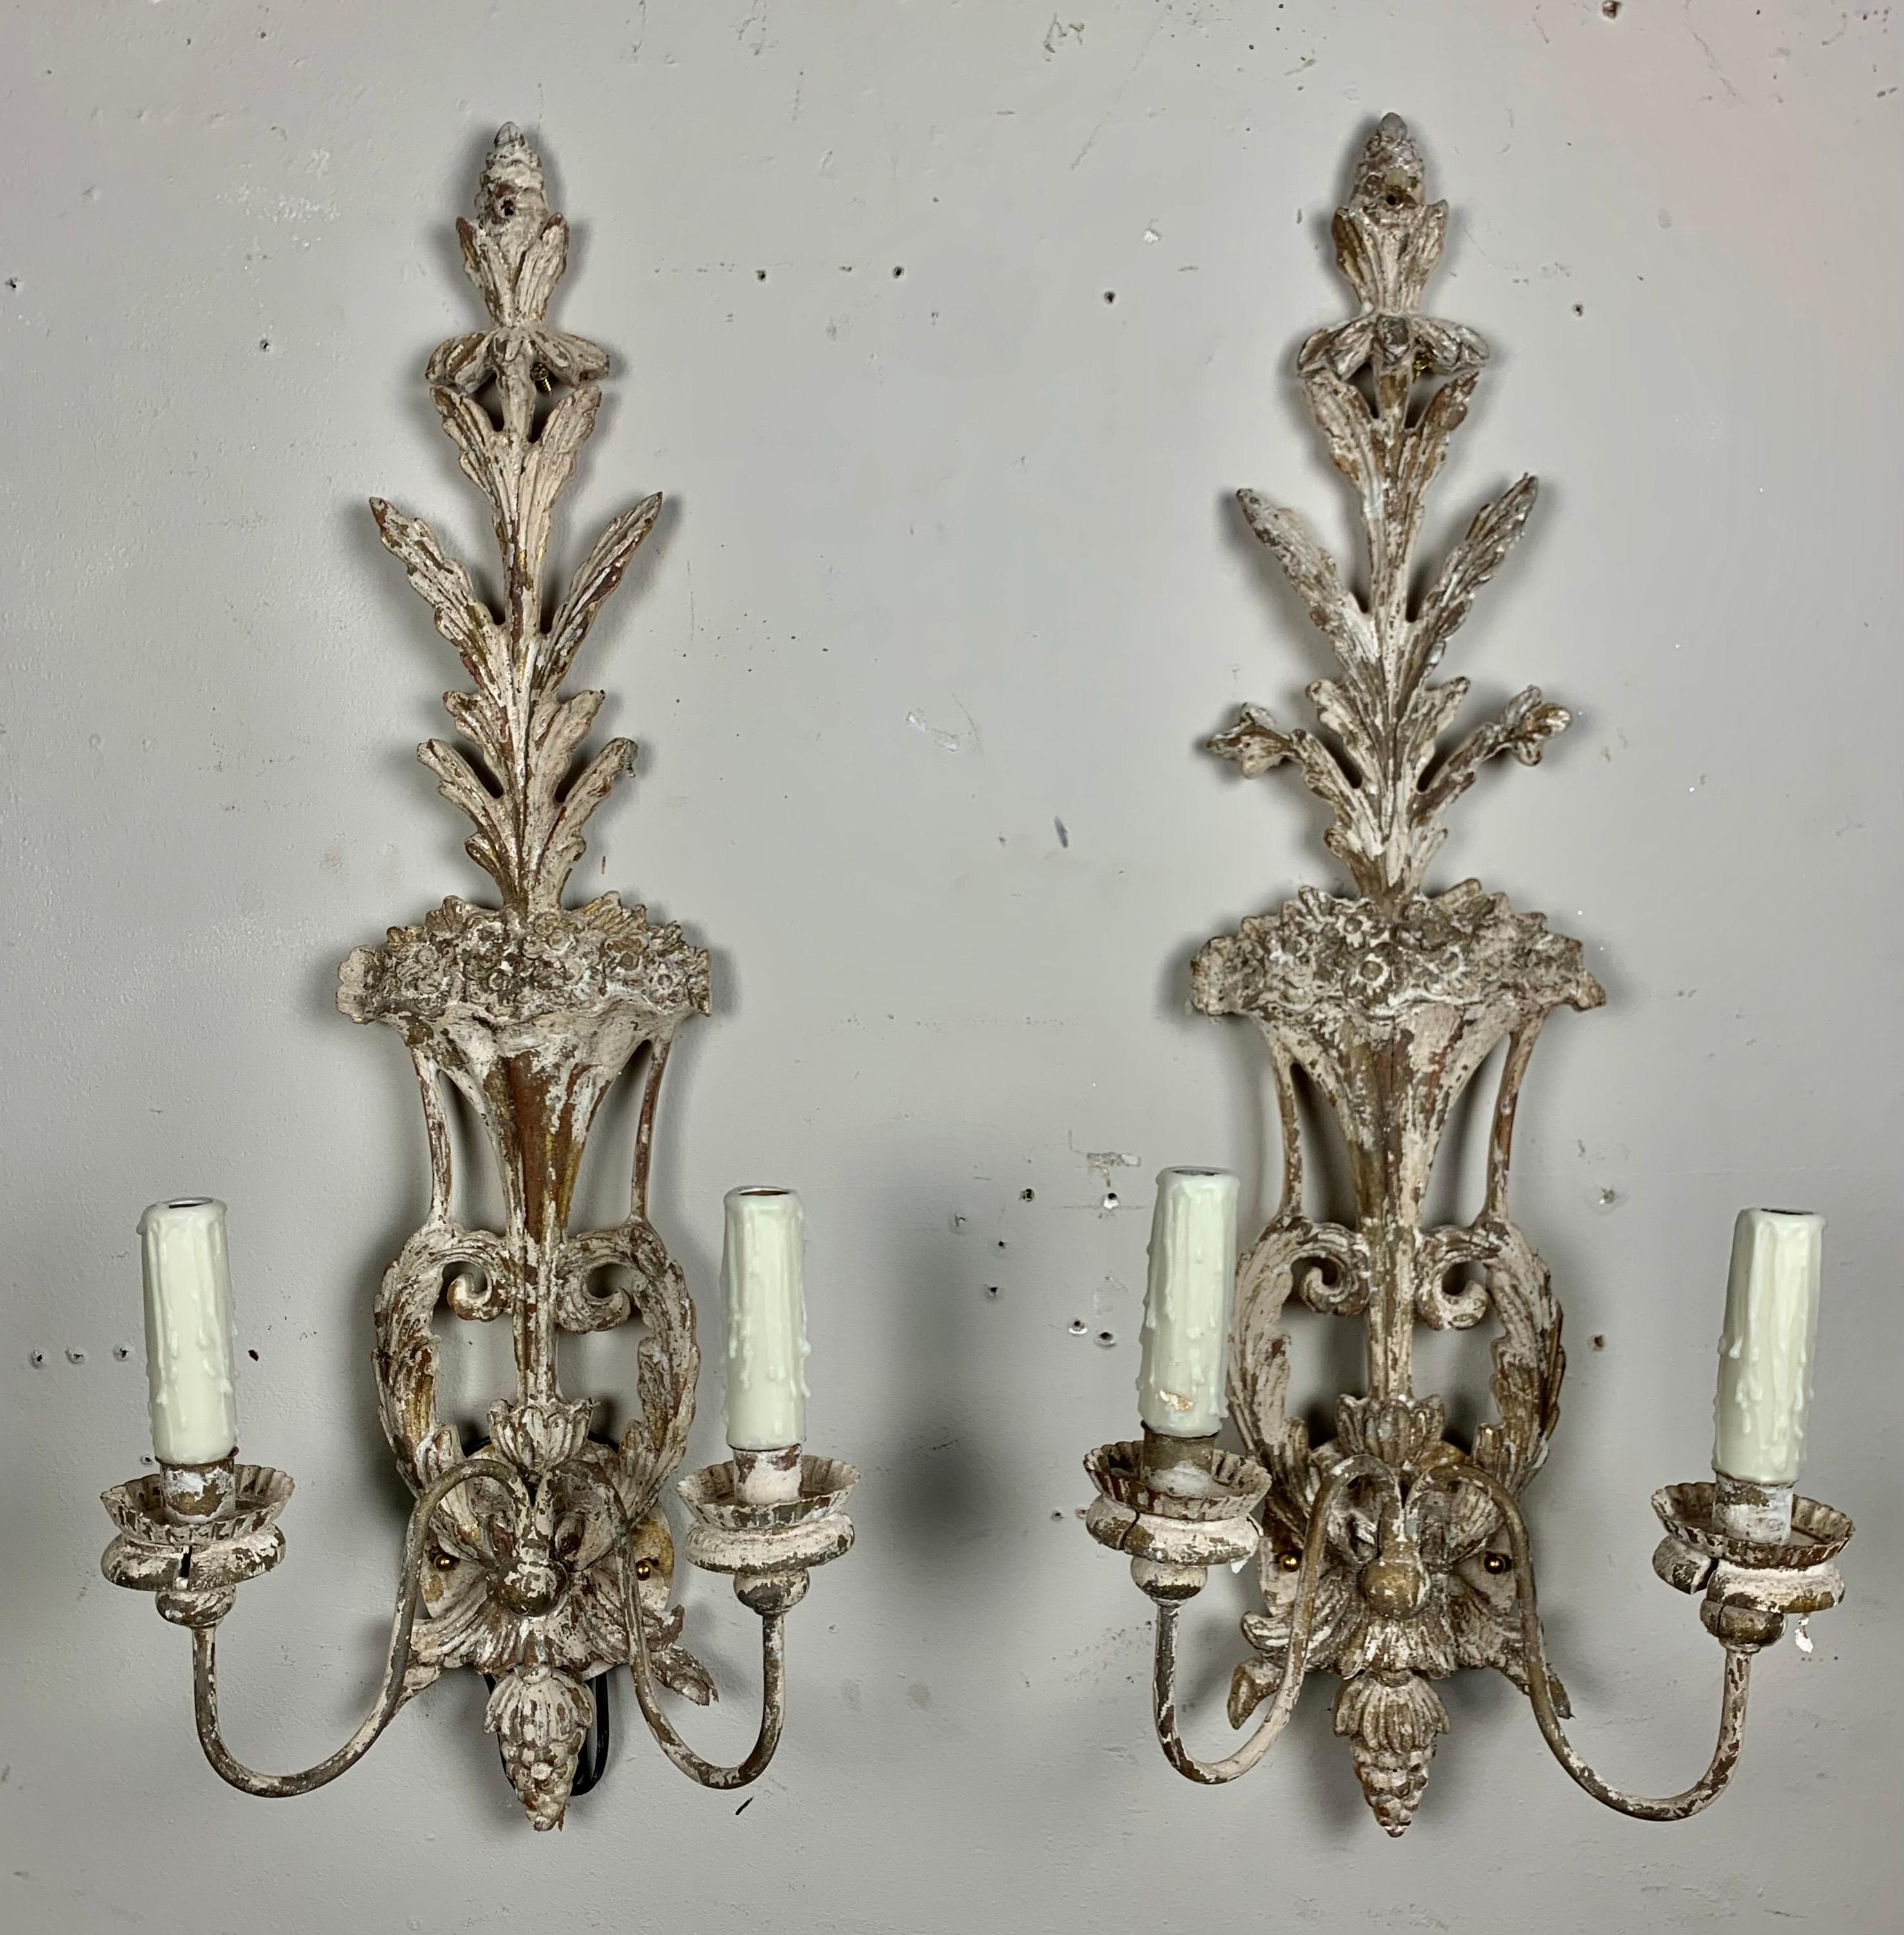 Pair of carved wood Italian painted 2-light sconces newly rewired with drip wax candle covers. Ready to install.